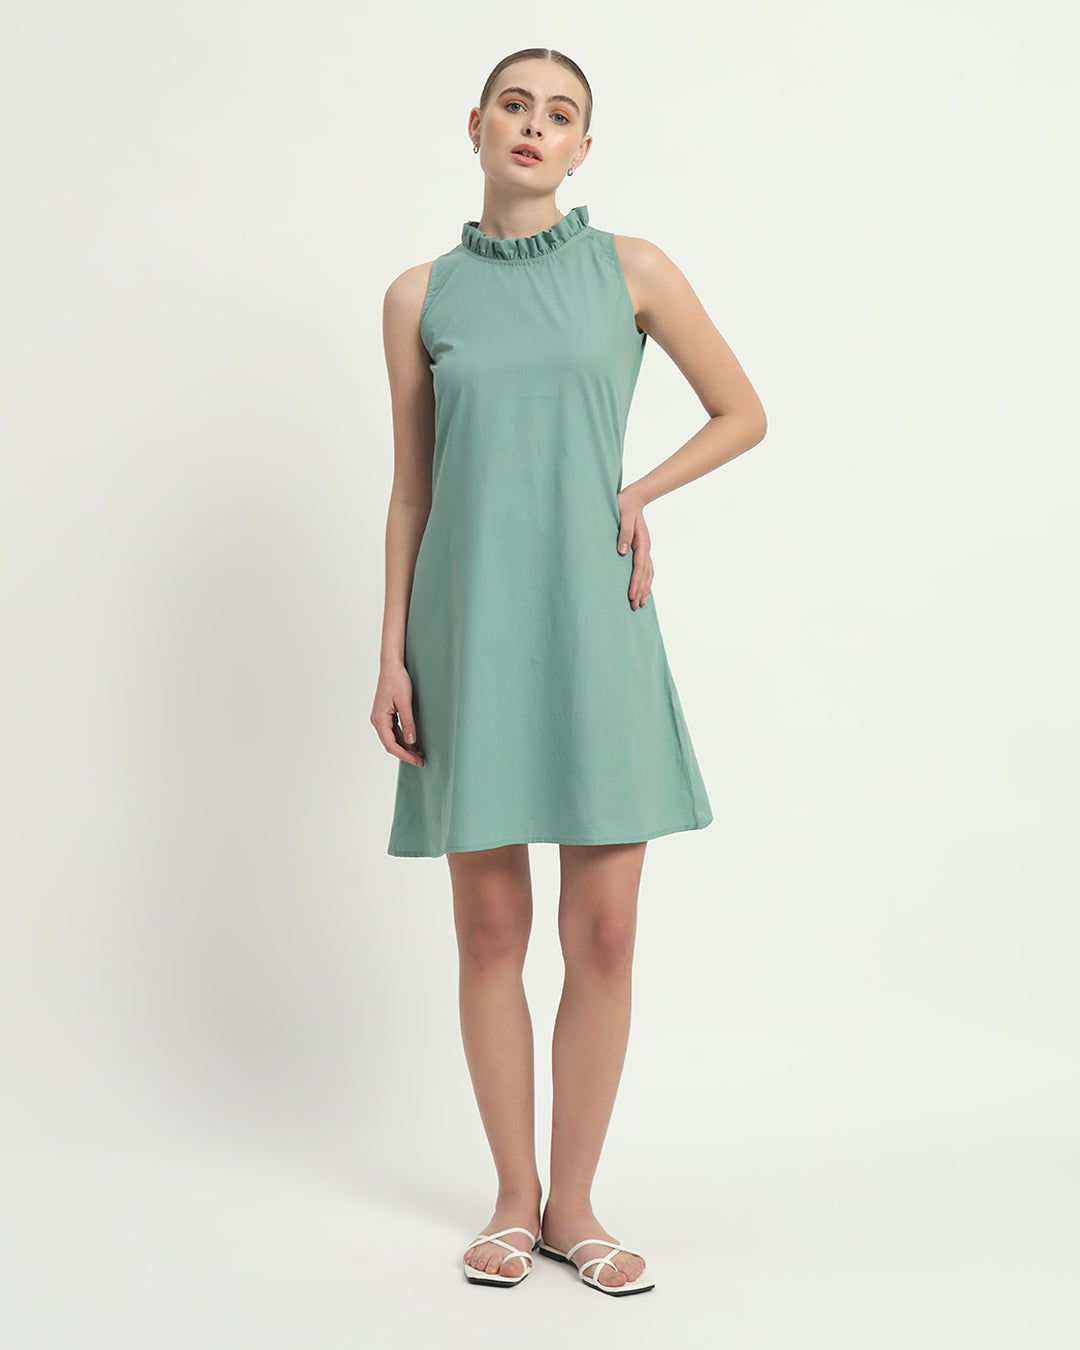 The Mint Angelica Cotton Dress